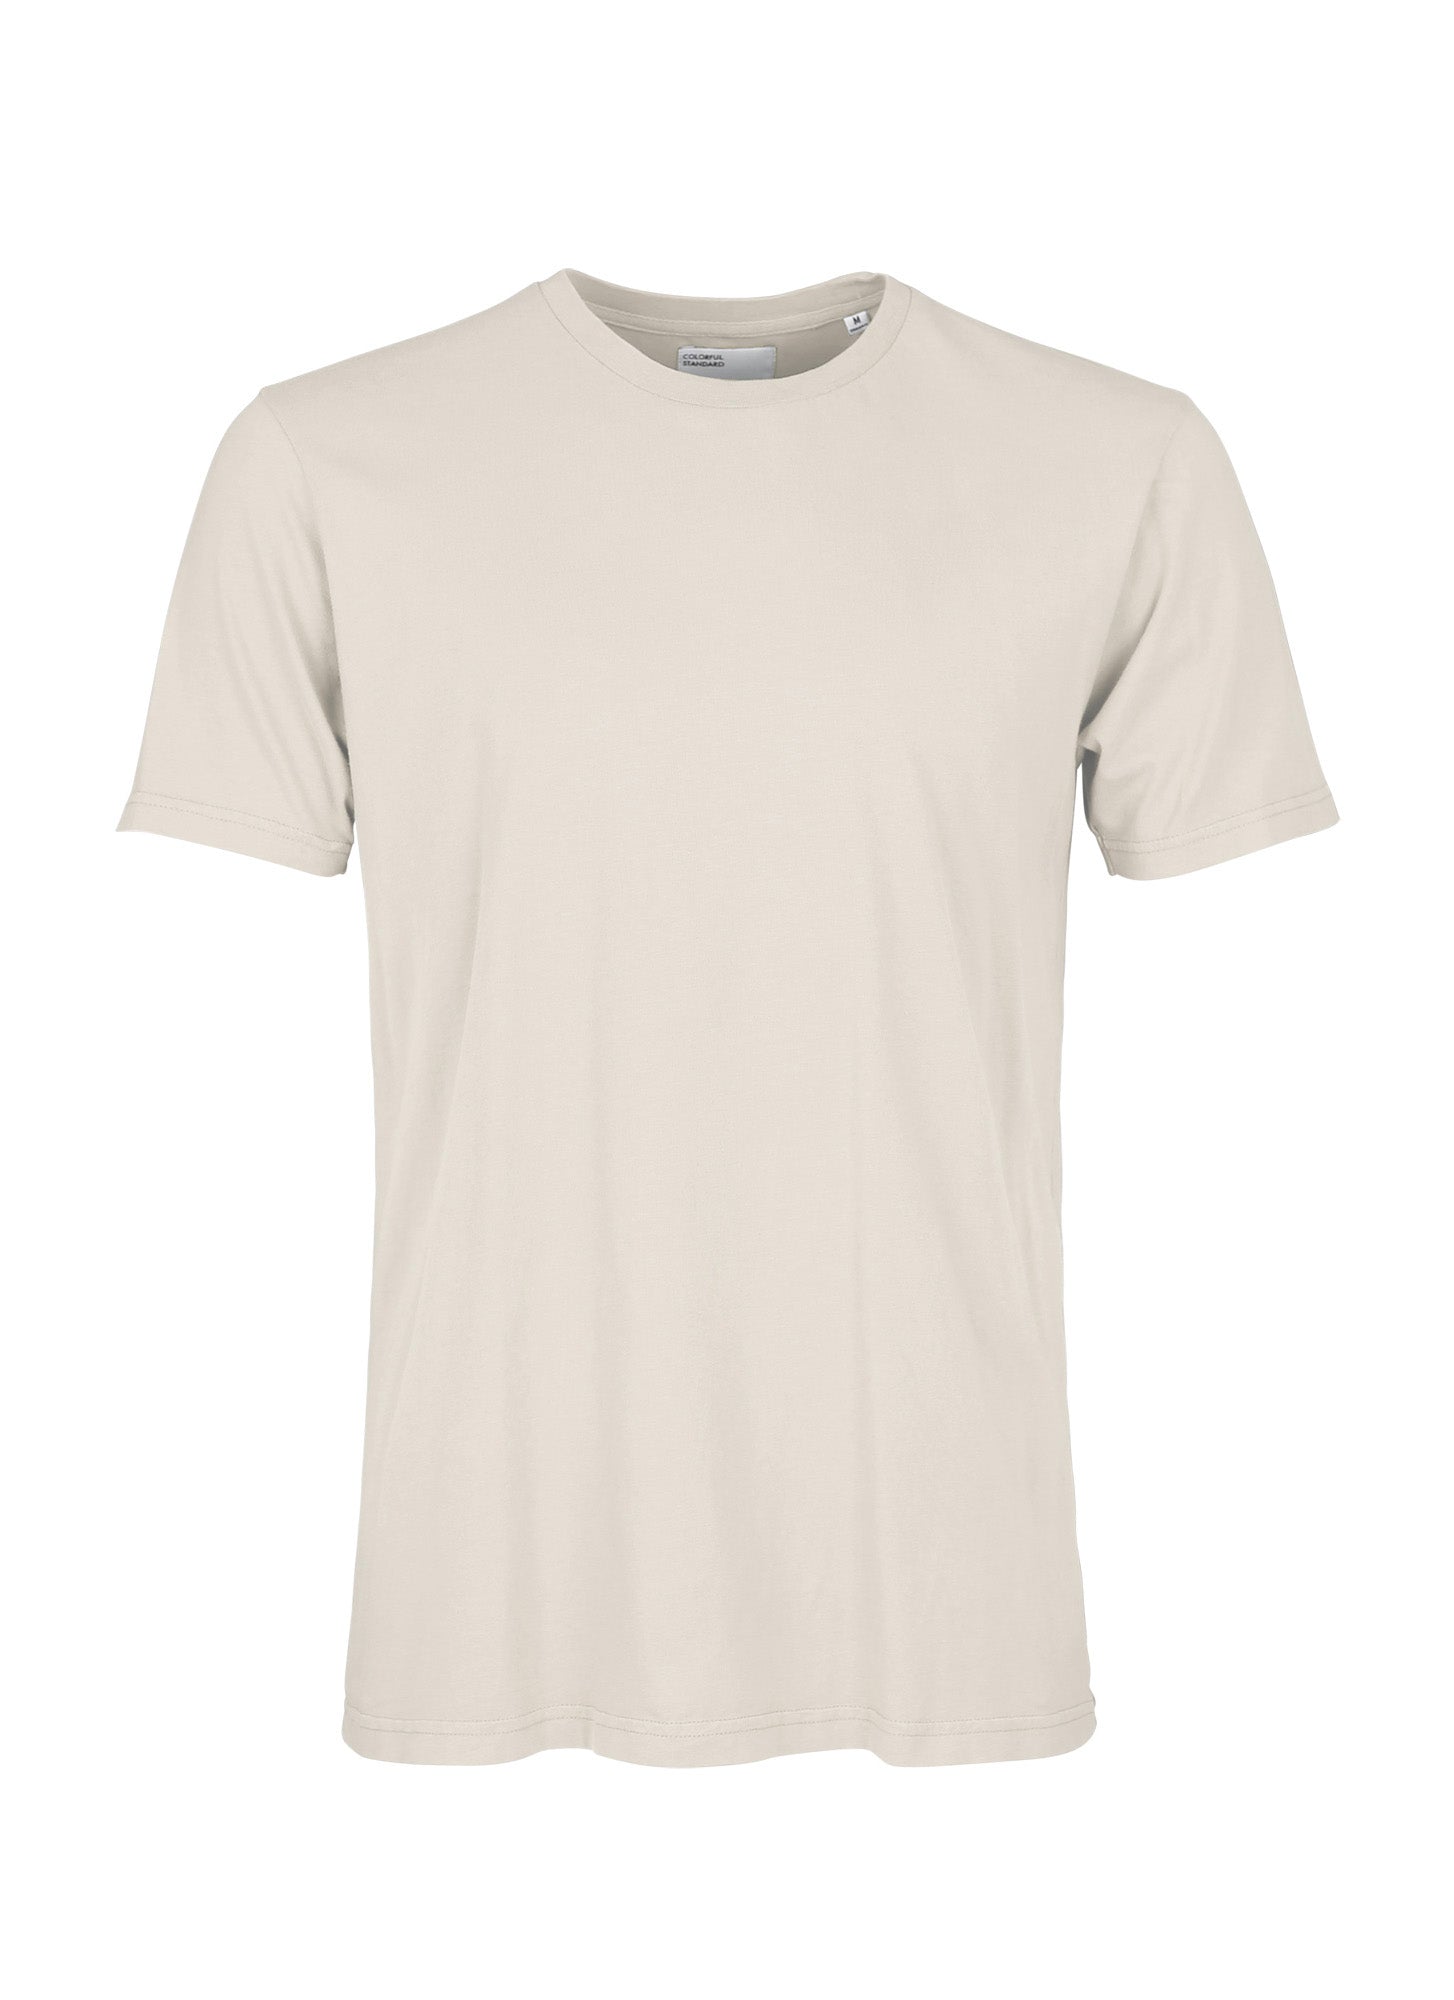 Colorful Standard Men's Classic Tee - Ivory White